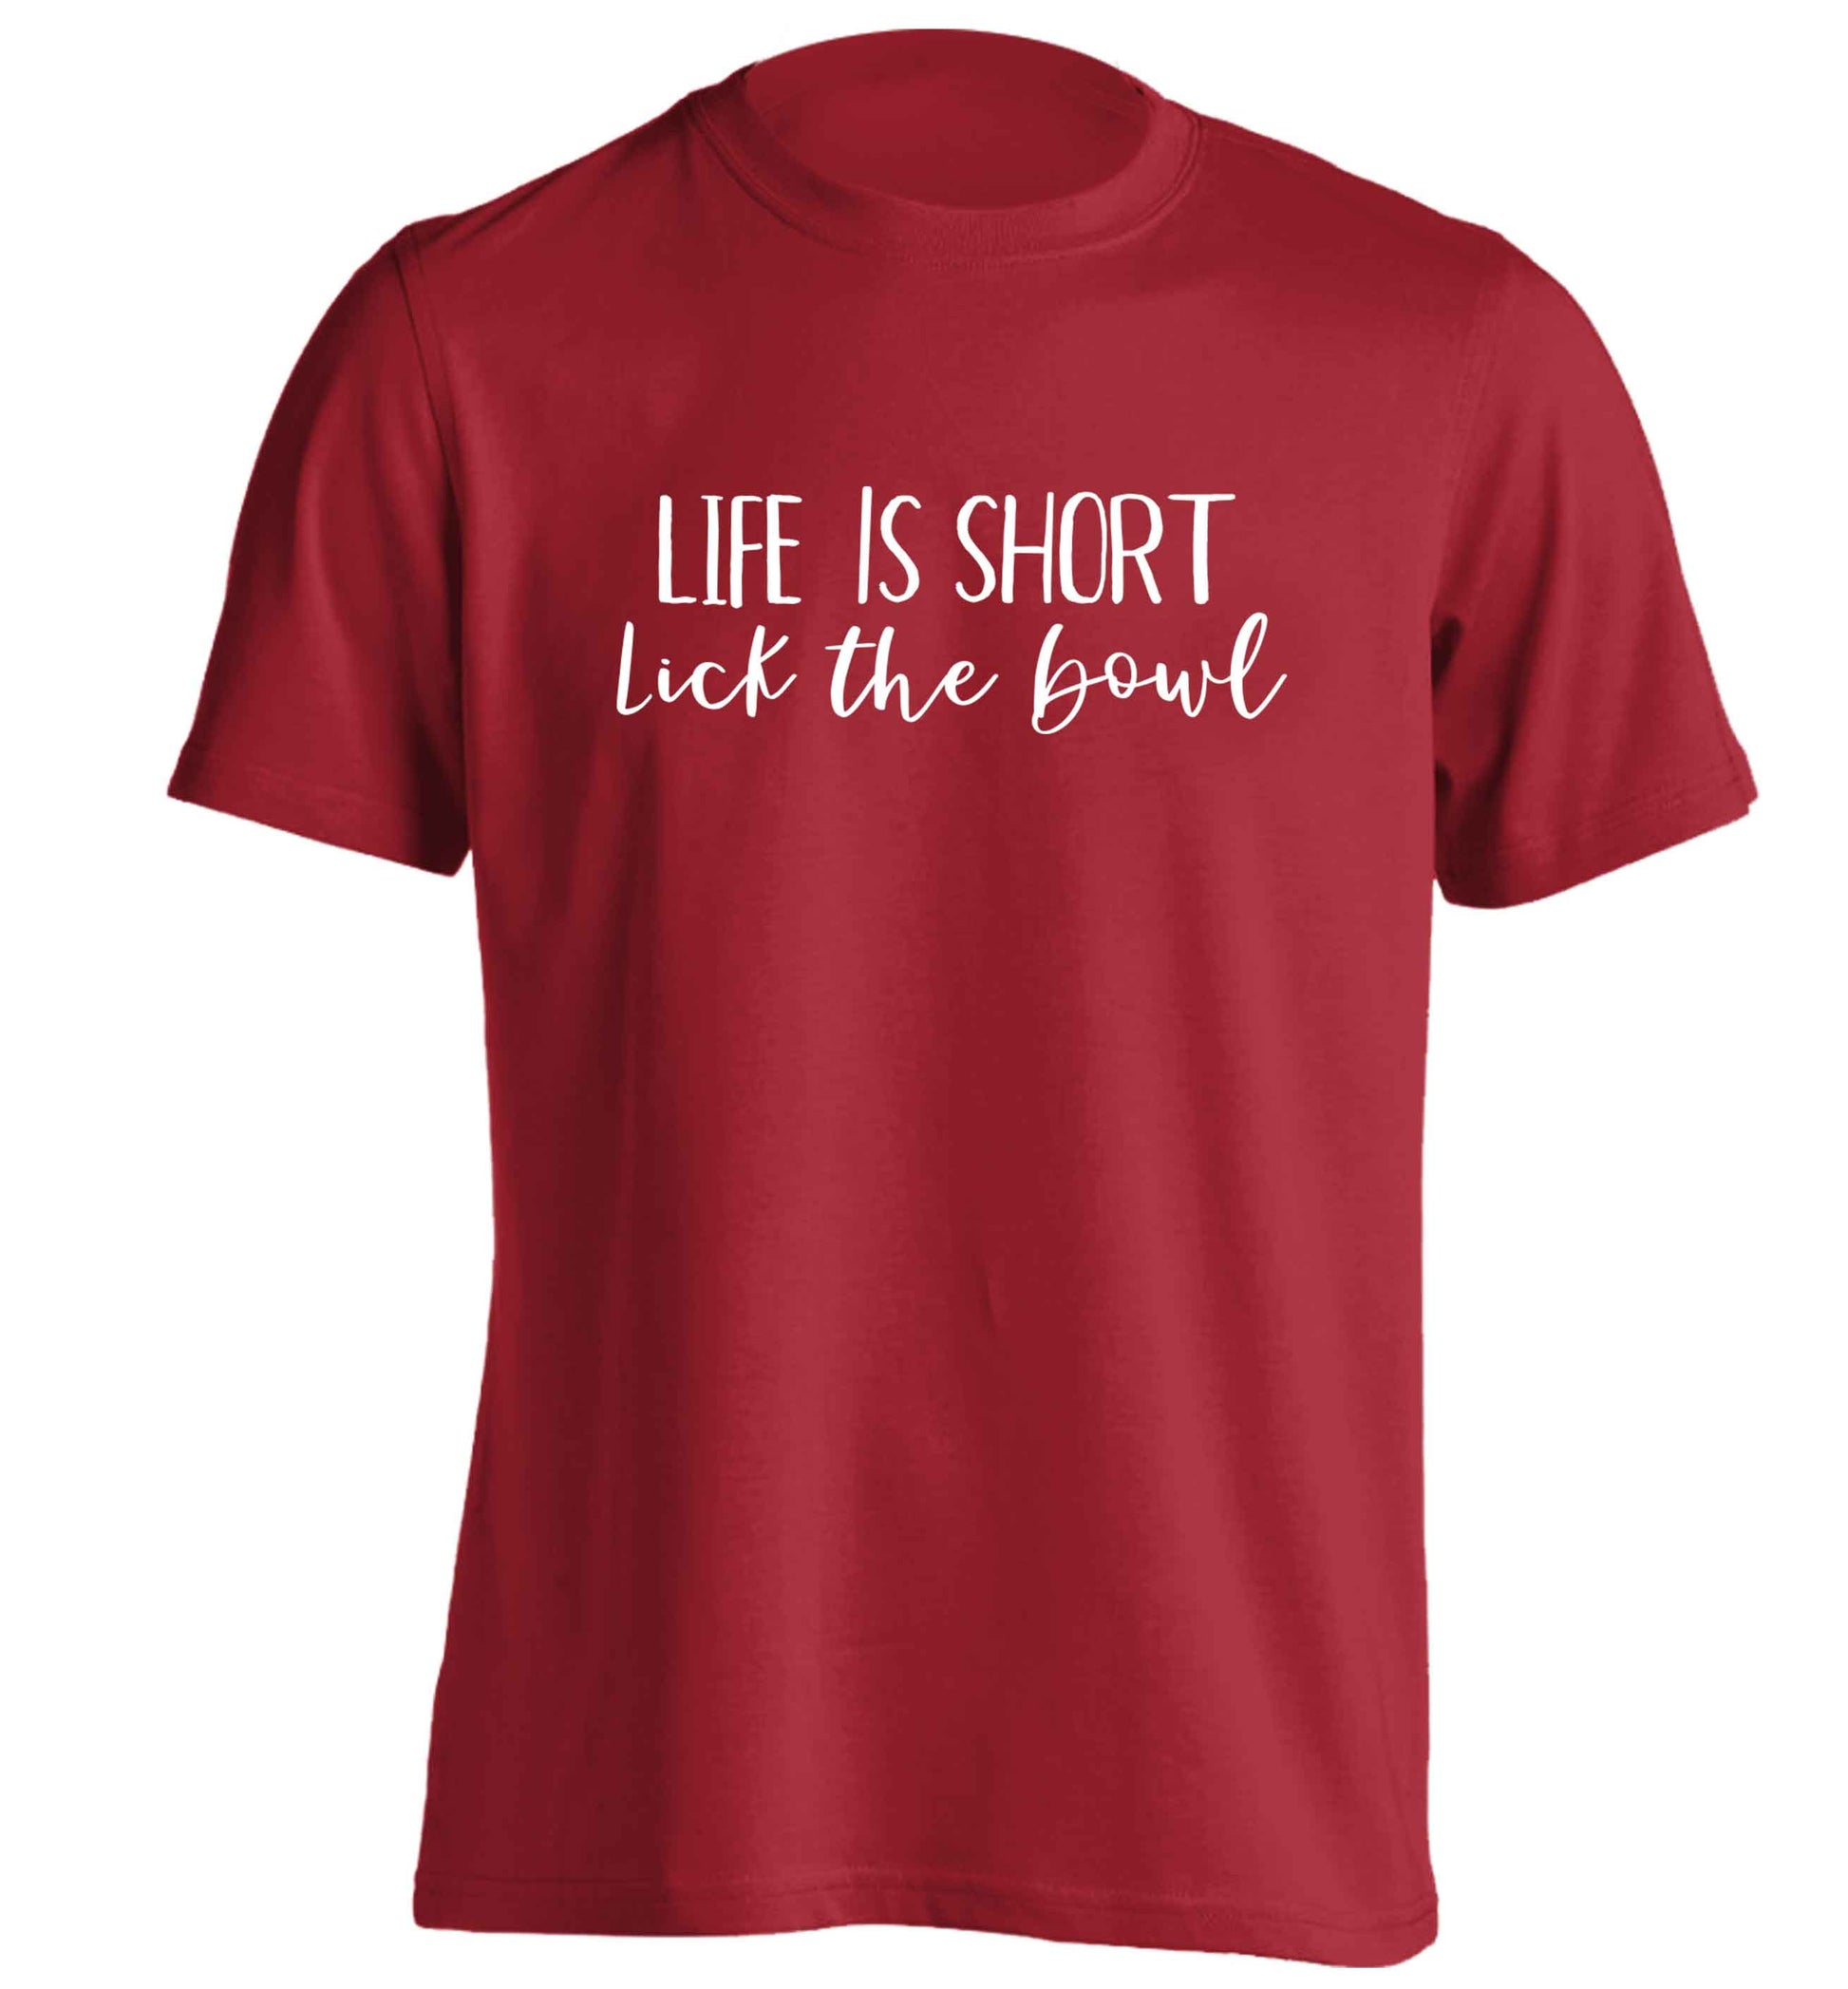 Life is short lick the bowl adults unisex red Tshirt 2XL